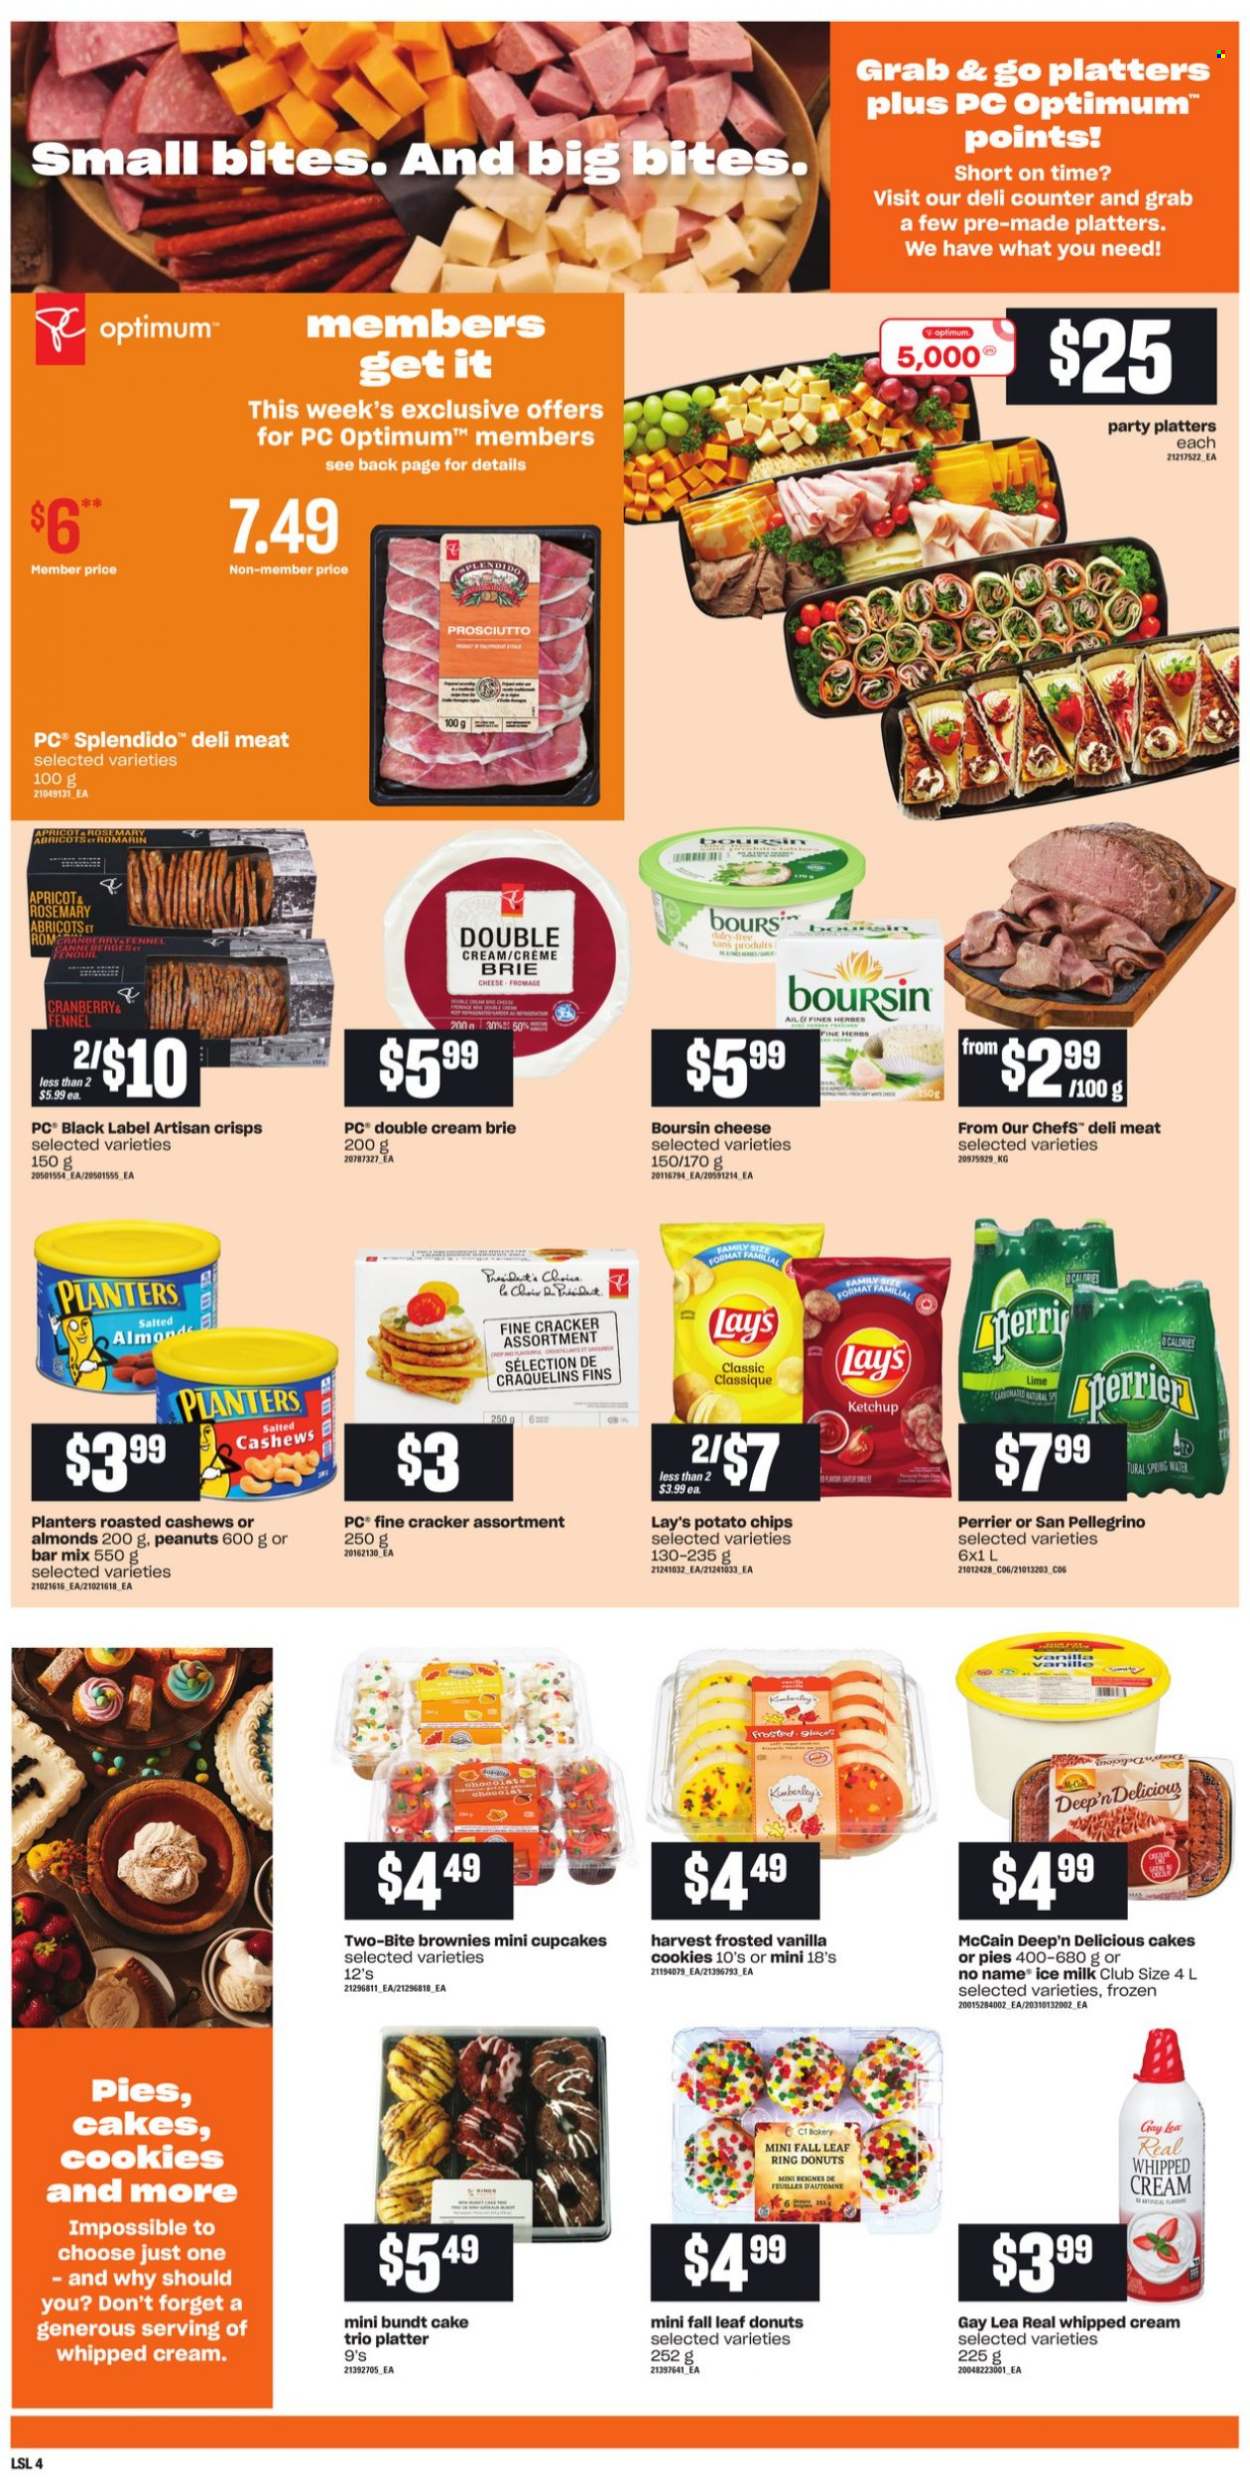 thumbnail - Loblaws Flyer - September 30, 2021 - October 06, 2021 - Sales products - cake, bundt, cupcake, brownies, donut, No Name, prosciutto, cheese, brie, milk, whipped cream, McCain, cookies, crackers, potato chips, Lay’s, fennel, rosemary, herbs, almonds, cashews, peanuts, Planters, Perrier, spring water, San Pellegrino, Optimum, ketchup. Page 6.